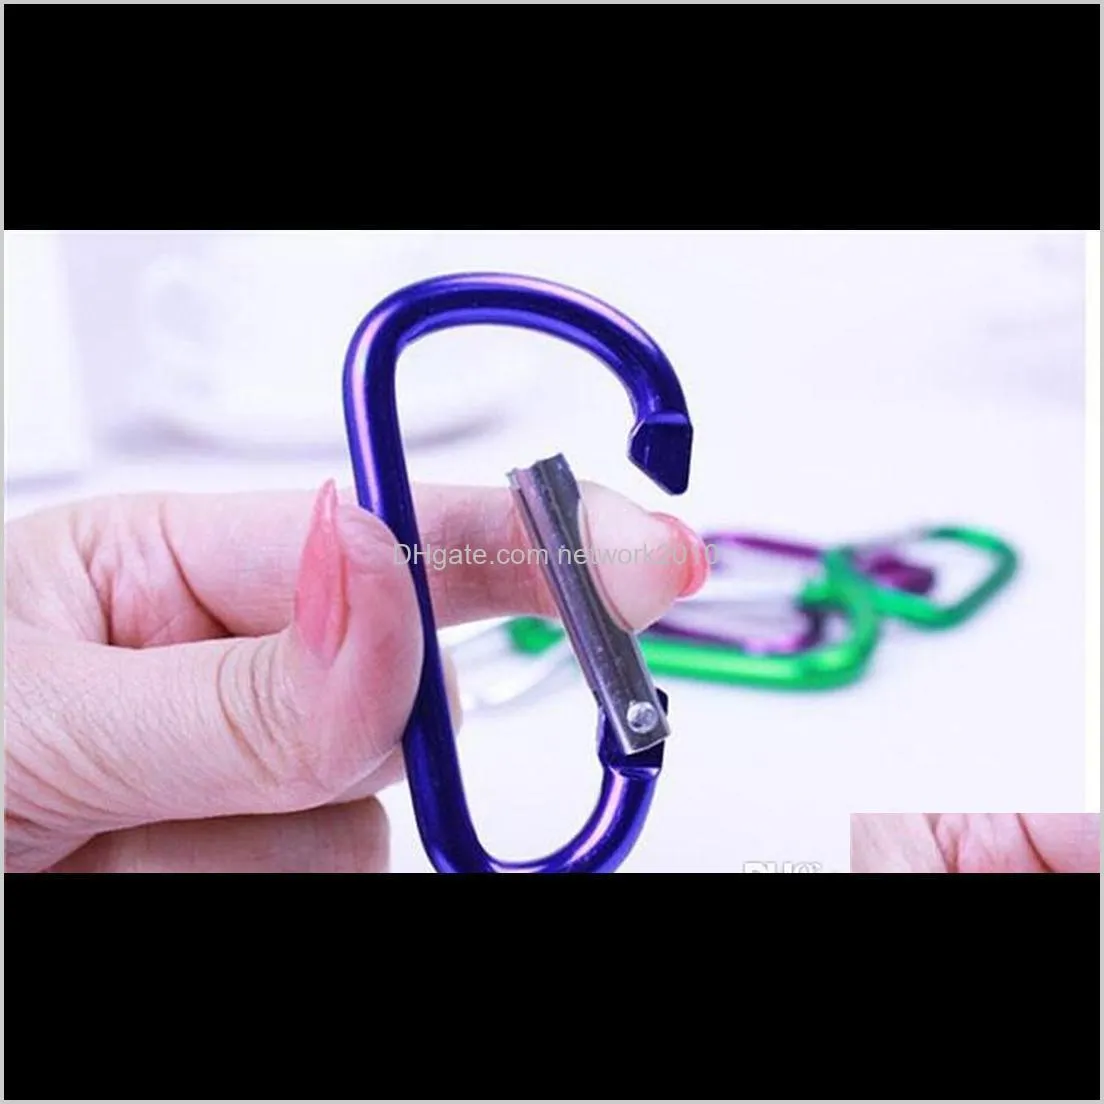 carabiner ring keyrings key chains outdoor sports camp snap clip hook keychain hiking aluminum metal convenient hiking camping 